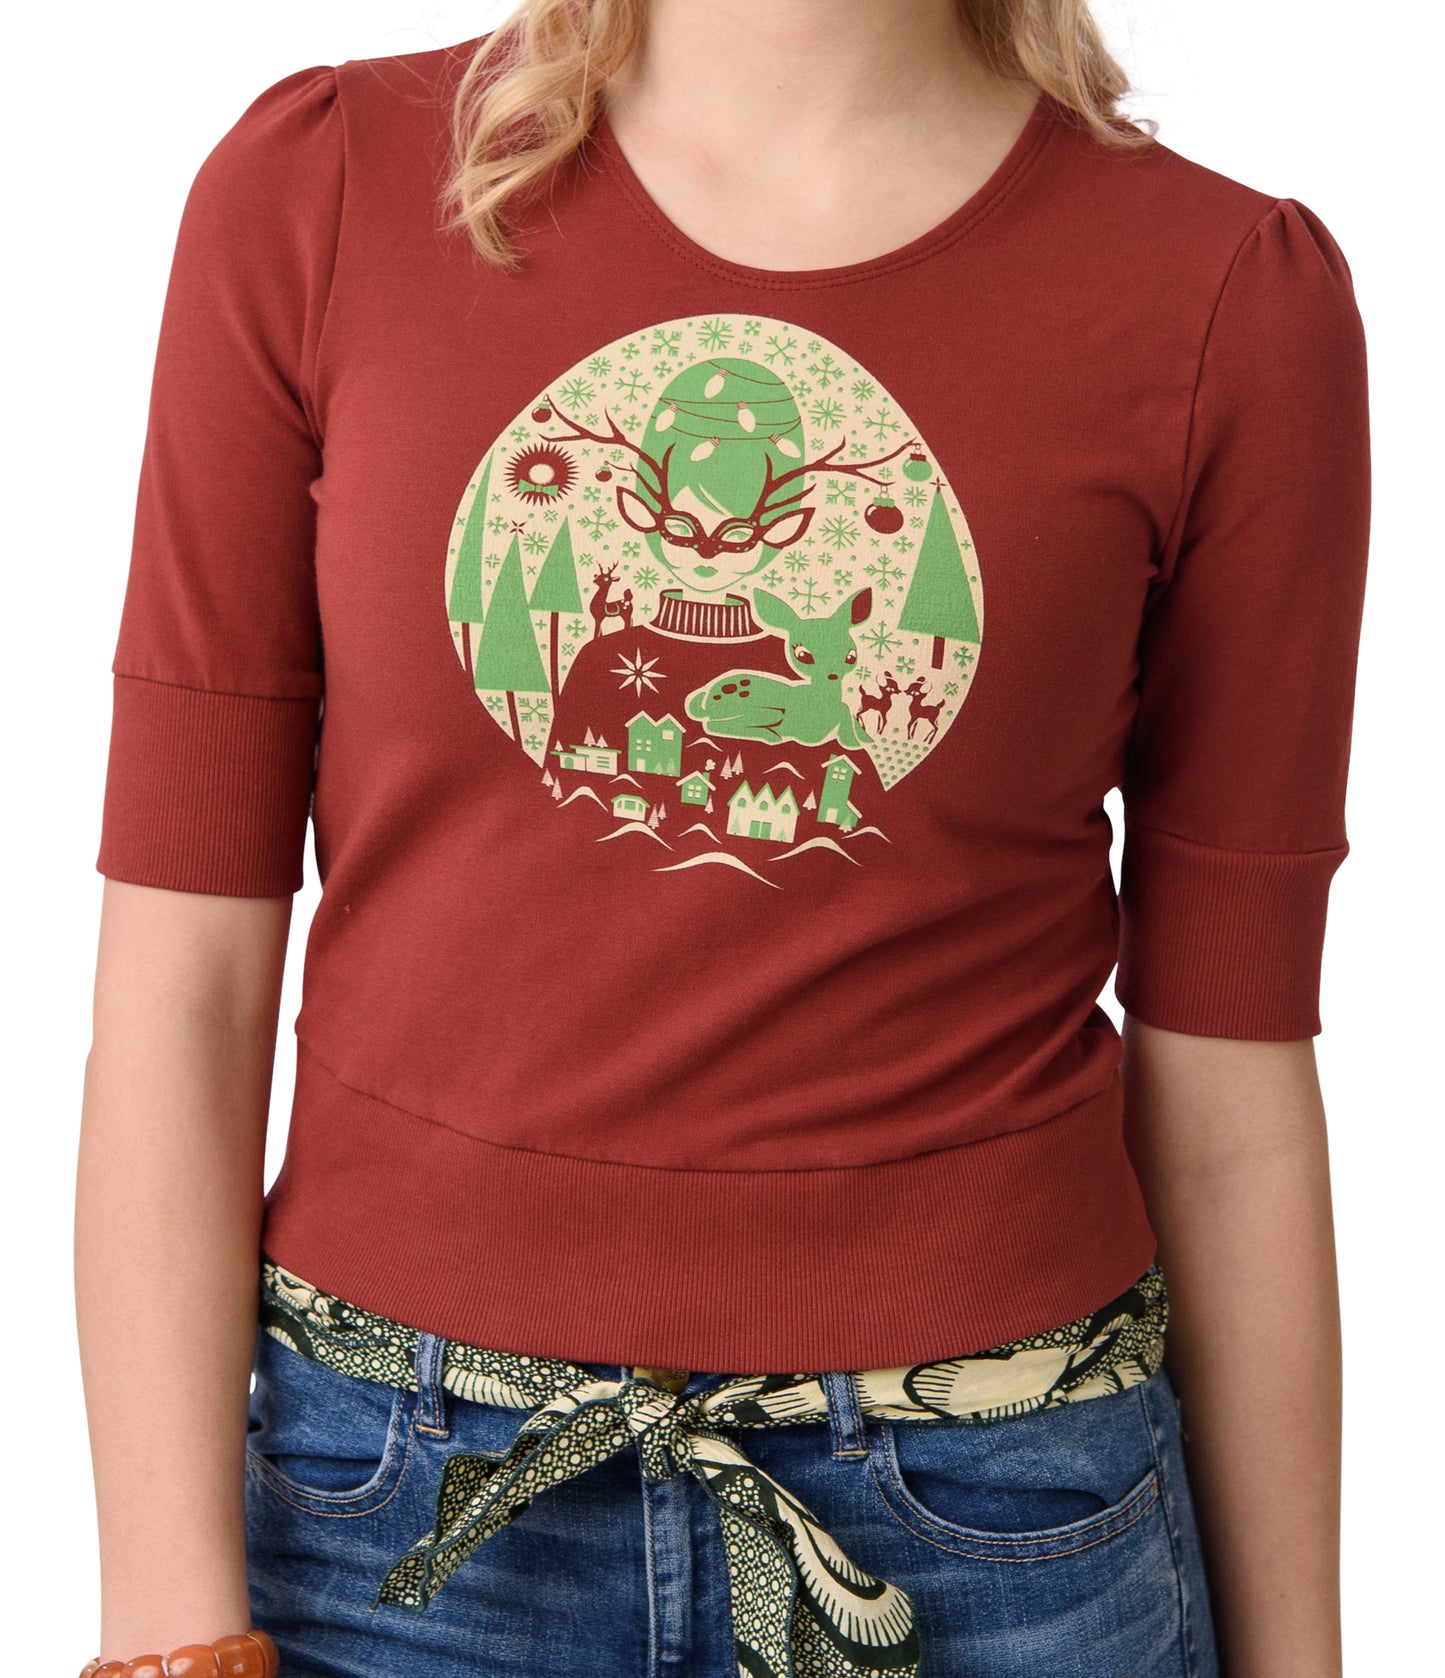 Rust- colored cropped French terry tee with bright green and off white screen print of masked girl with reindeer, trees and snowflakes